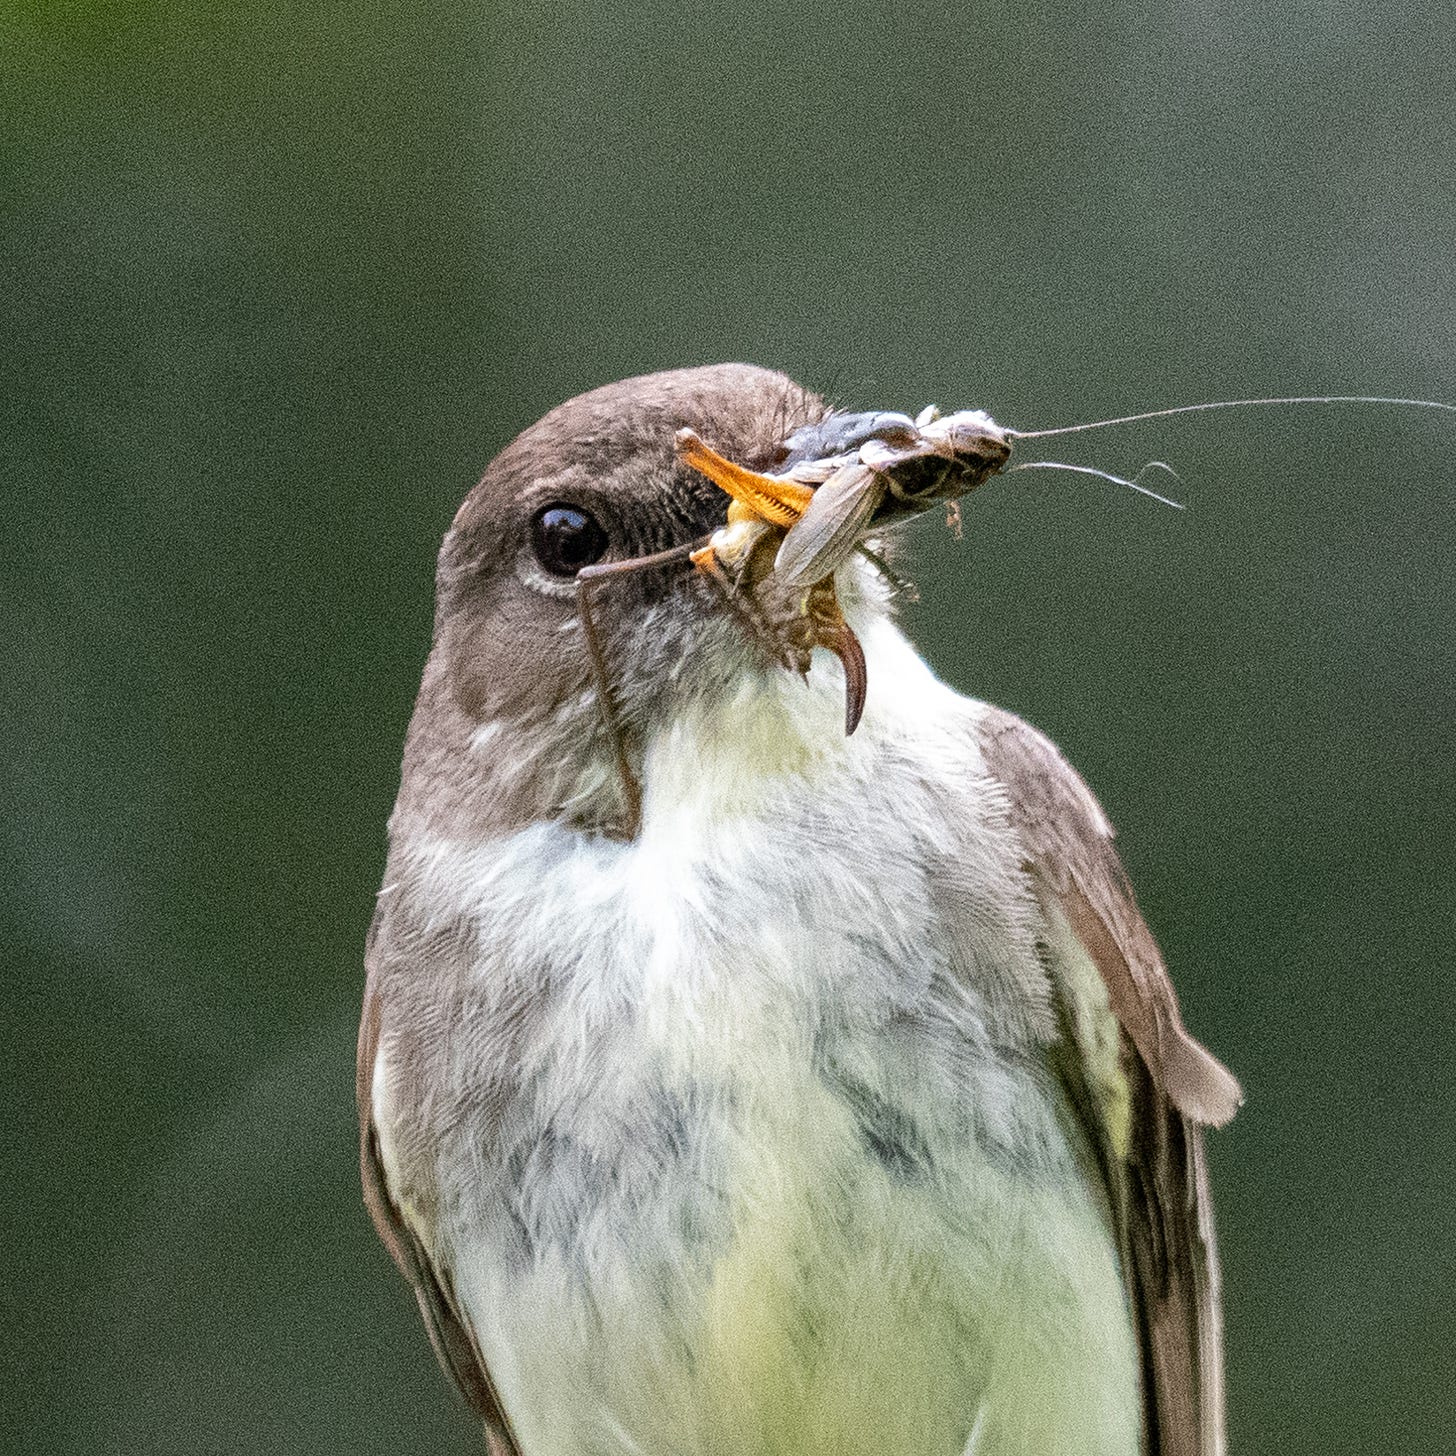 A close-up of an Eastern phoebe with a cricket in its beak